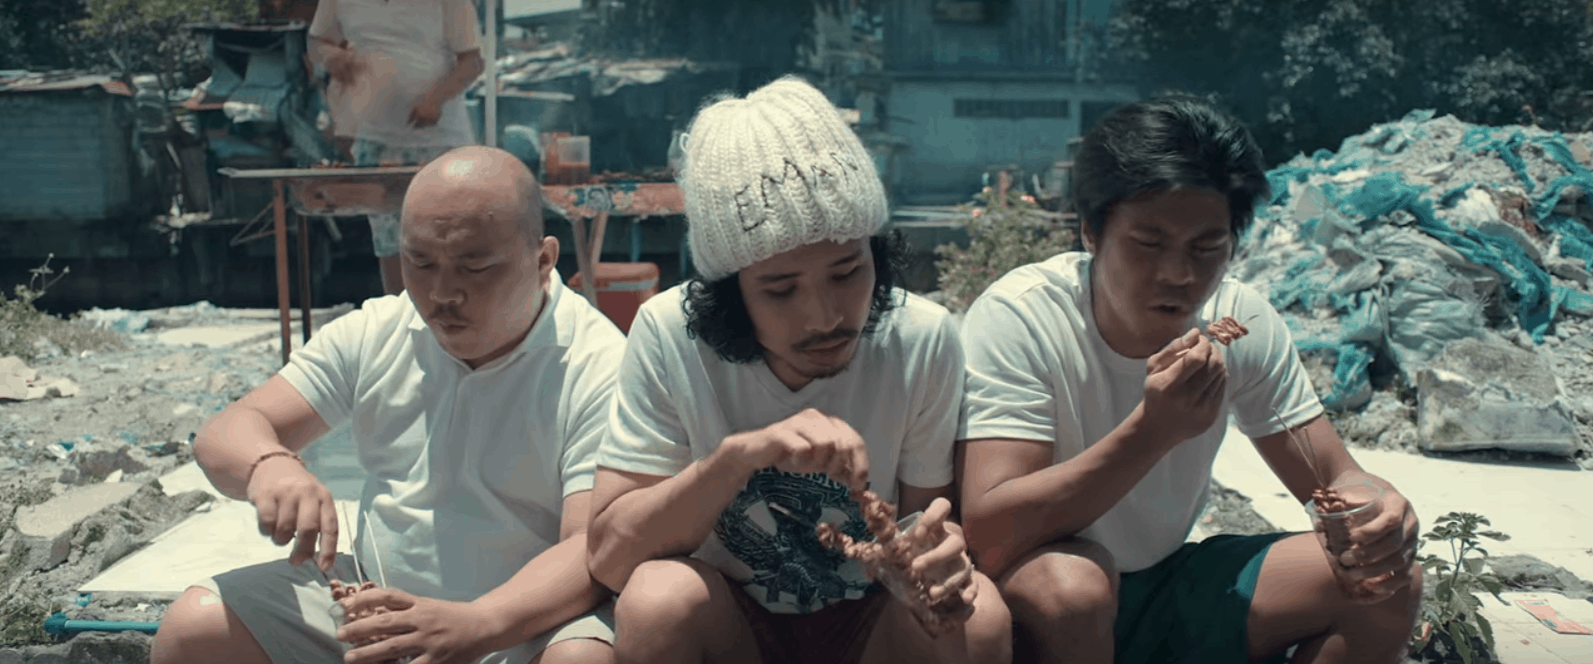 Underrated Pinoy comedy movie 'Ang Pangarap Kong Holdap' now on Netflix